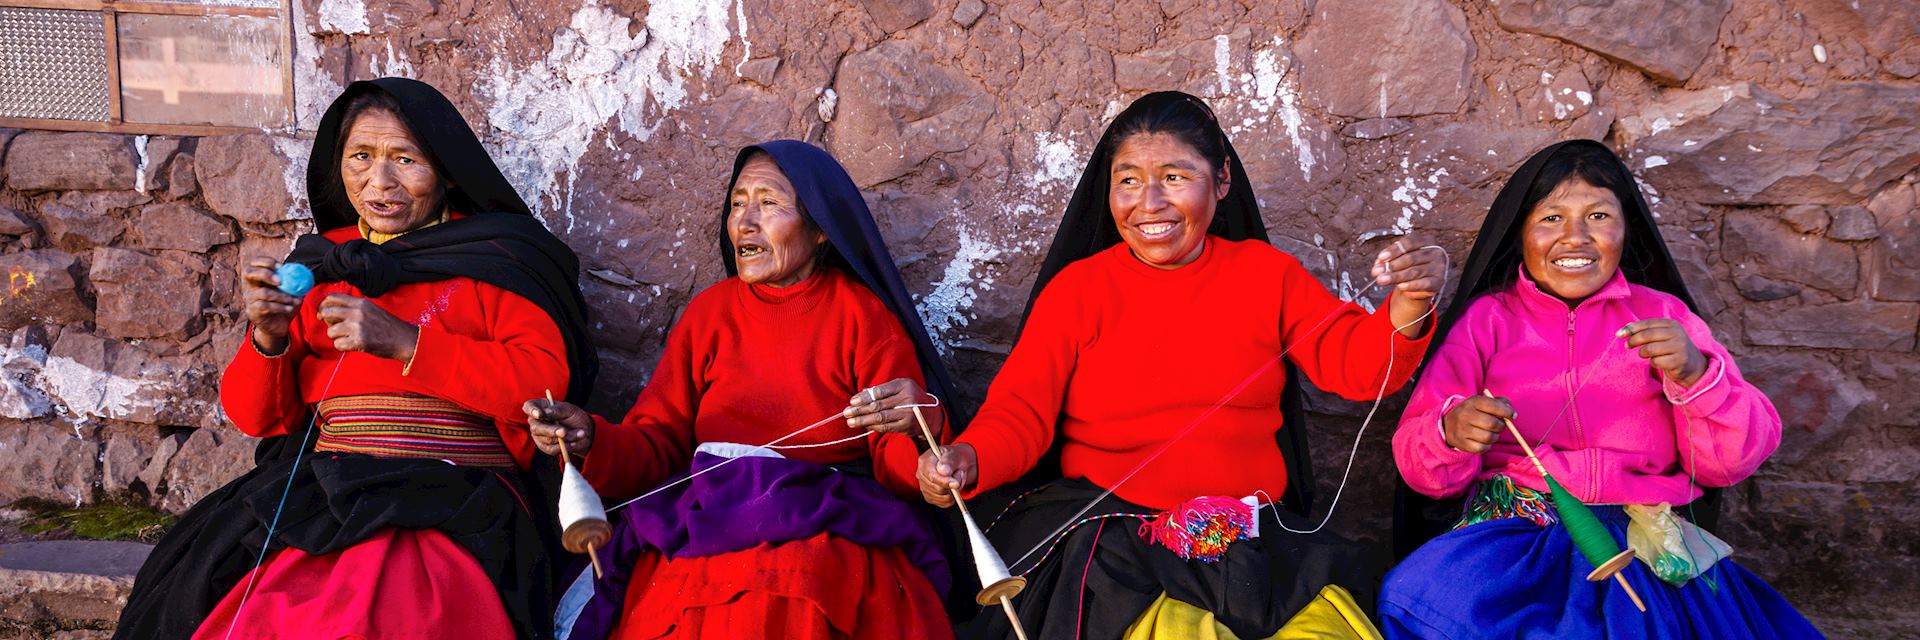 Women spinning wool on Taquile Island